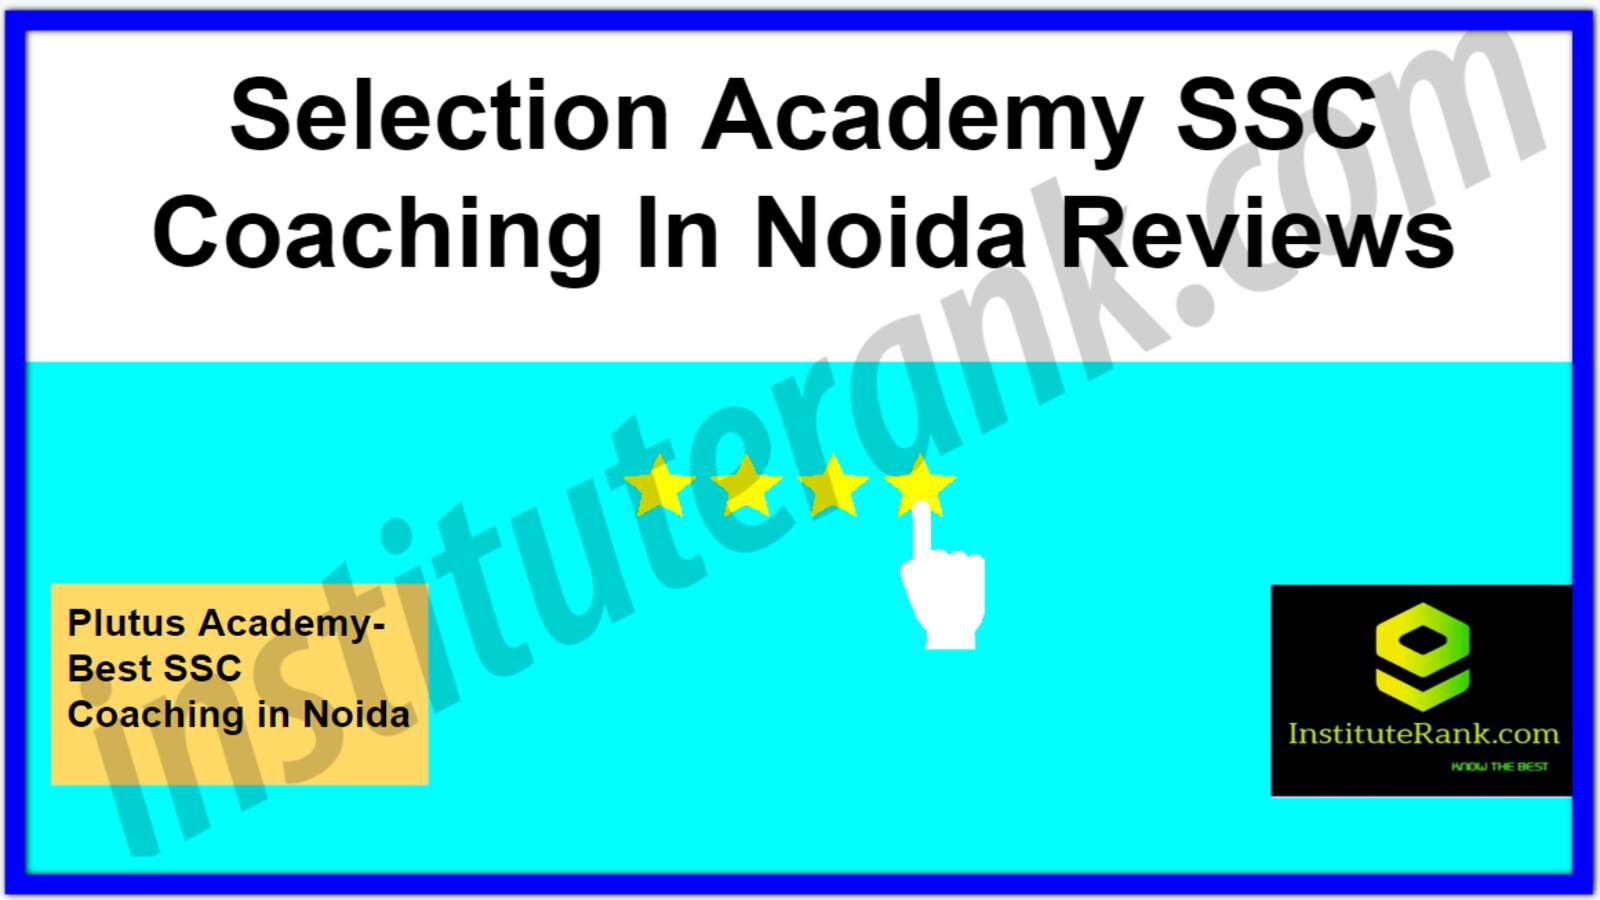 Selection Academy SSC Coaching in Noida Reviews